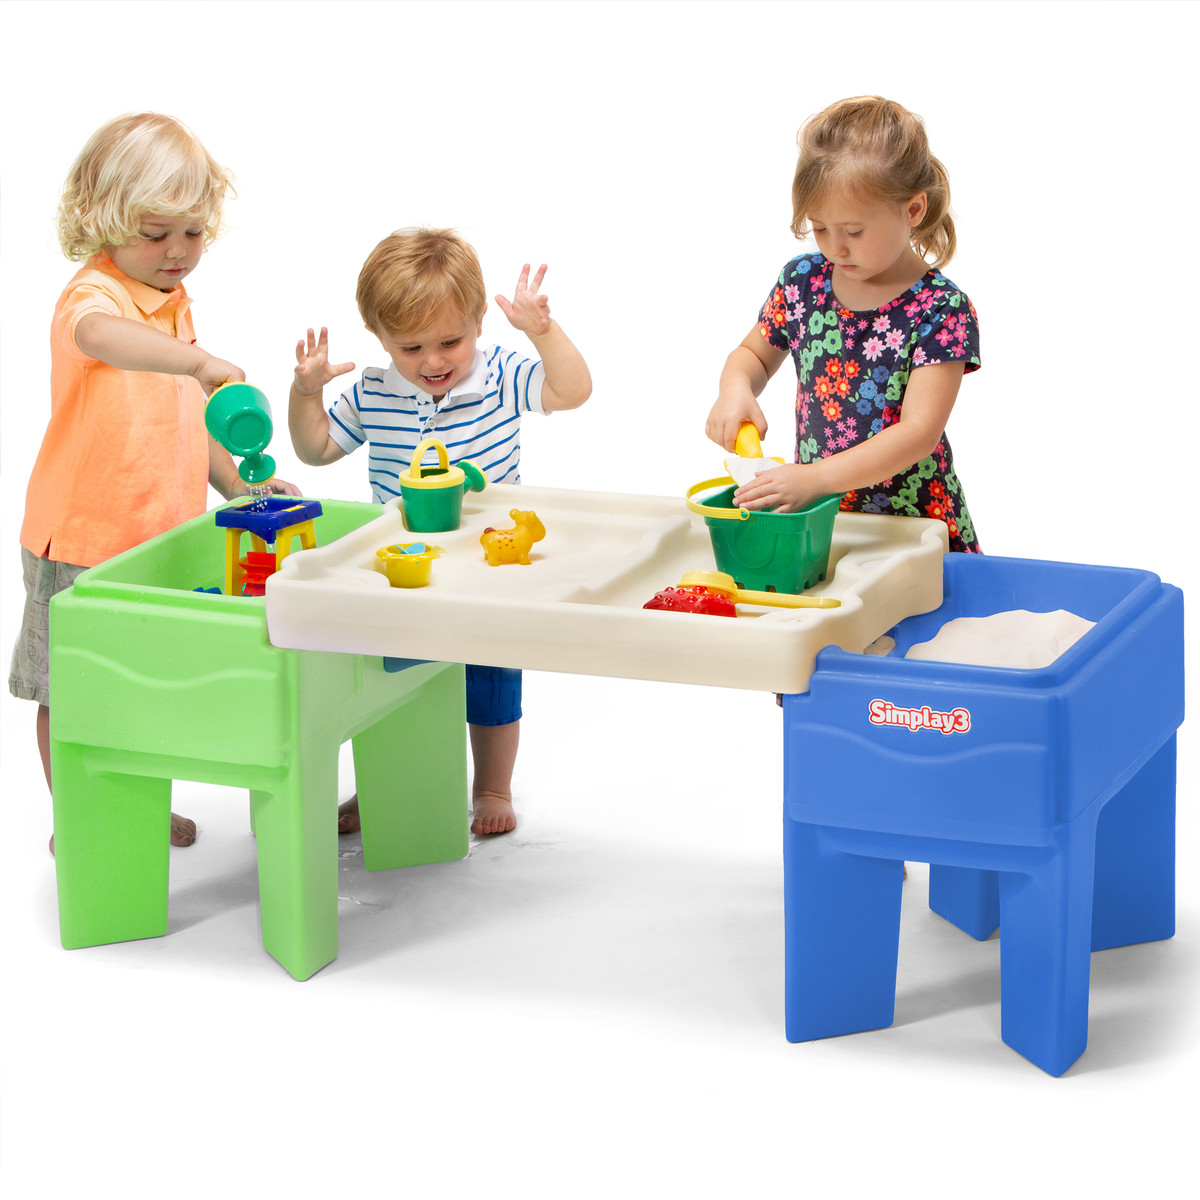 Simplay3 in and out table with three kids playing with sand and water